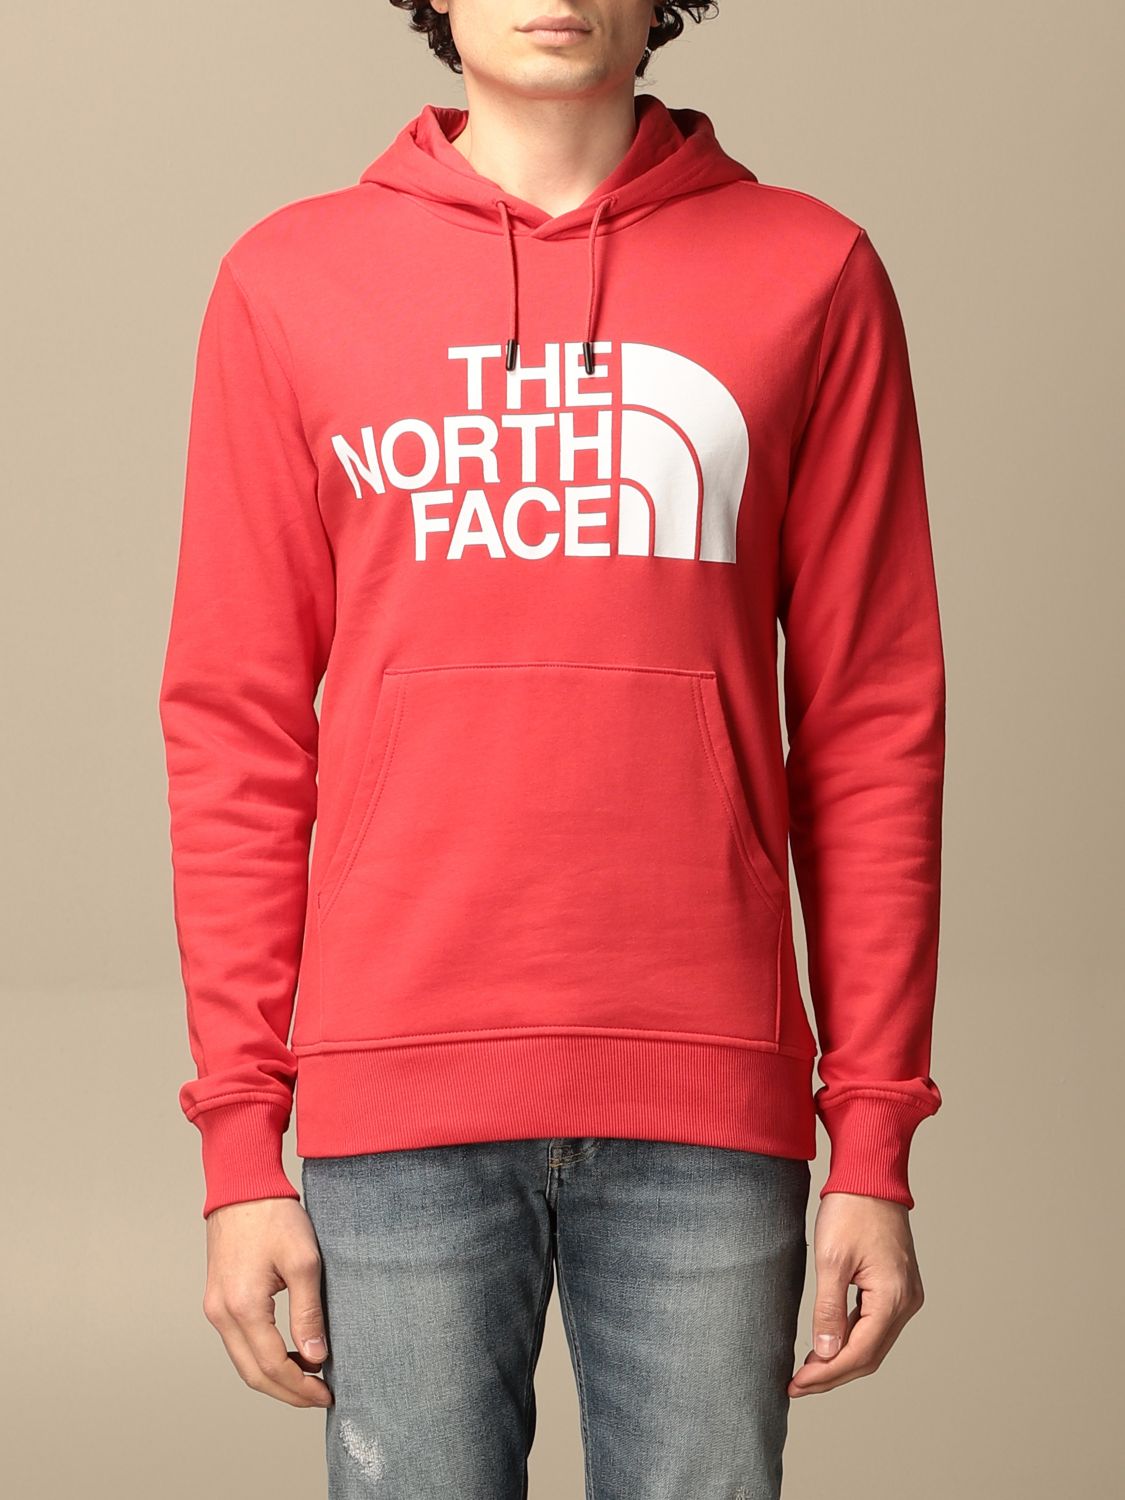 ocupado defecto alcohol THE NORTH FACE: Core sweatshirt with logo - Red | The North Face sweatshirt  NF0A3XYD online on GIGLIO.COM